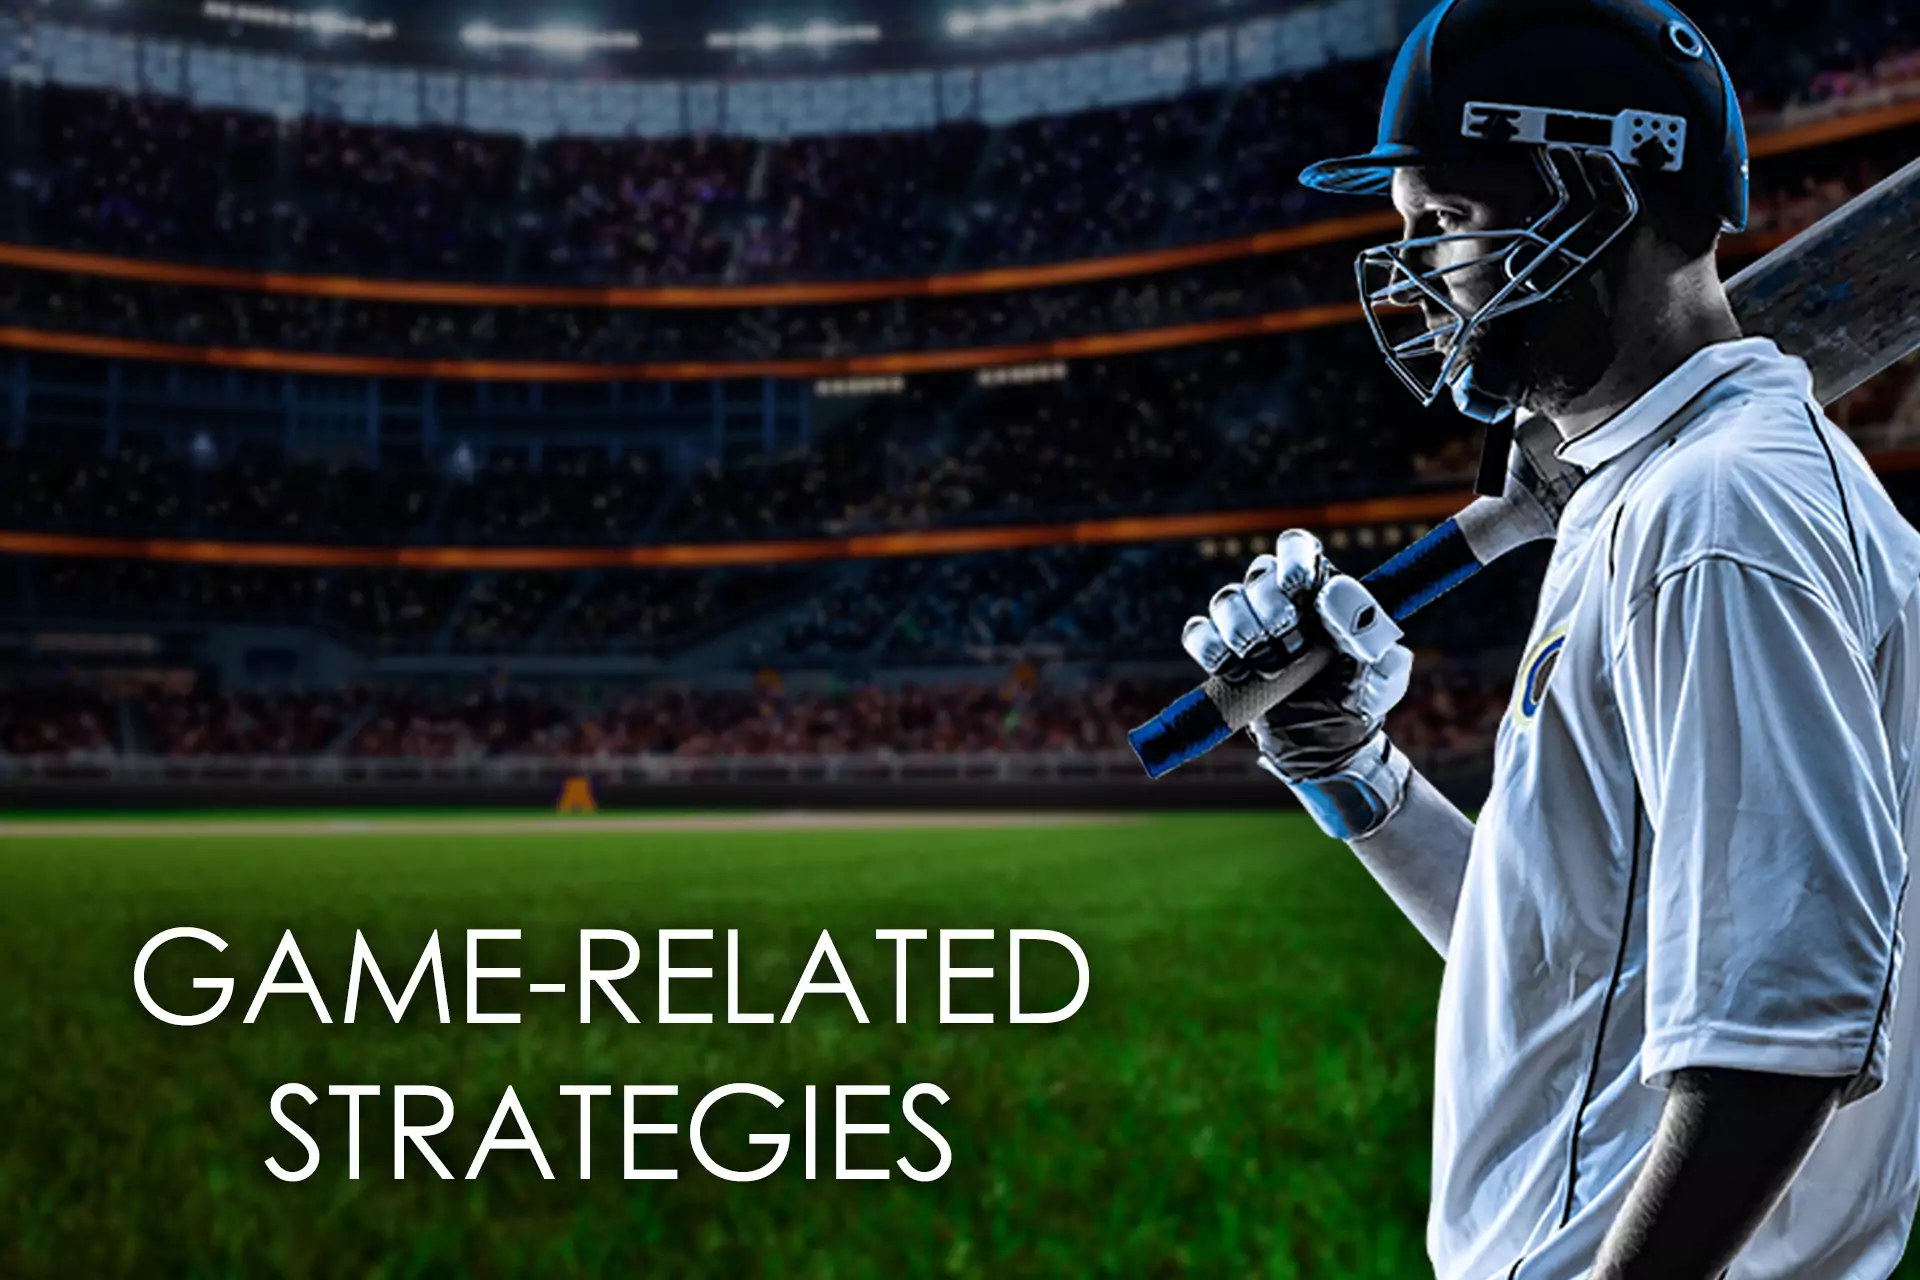 You need to know the characteristics of tournaments and players to use game-related strategies for predictions.